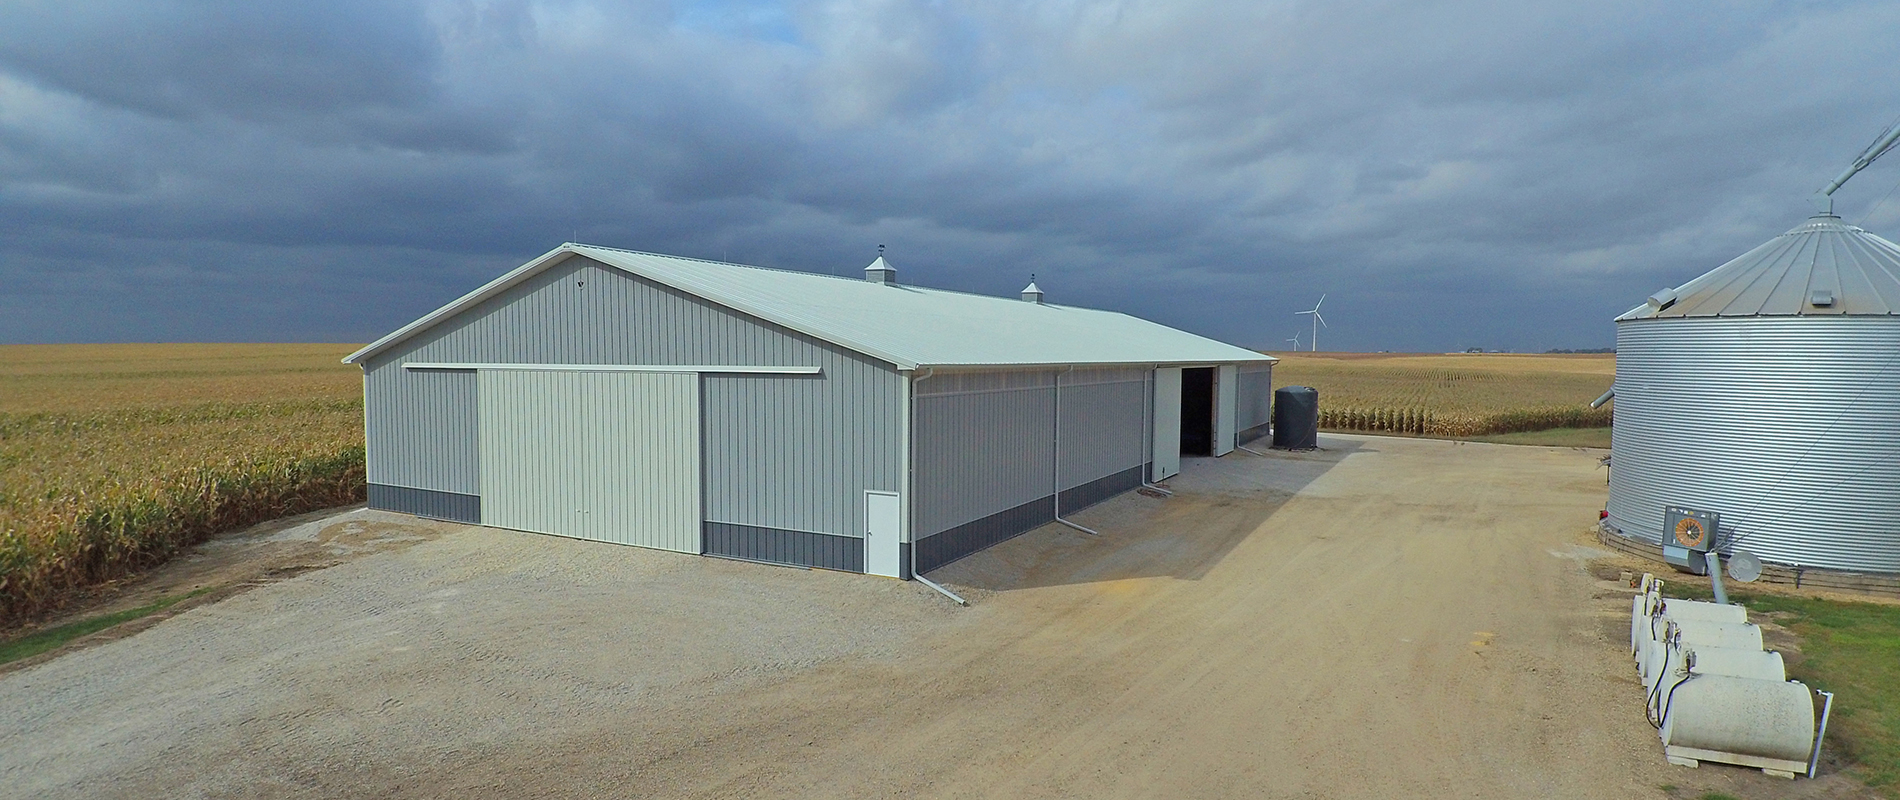 Ag Machine Sheds, Pole Barns, Workshops, Animal Containment and more.